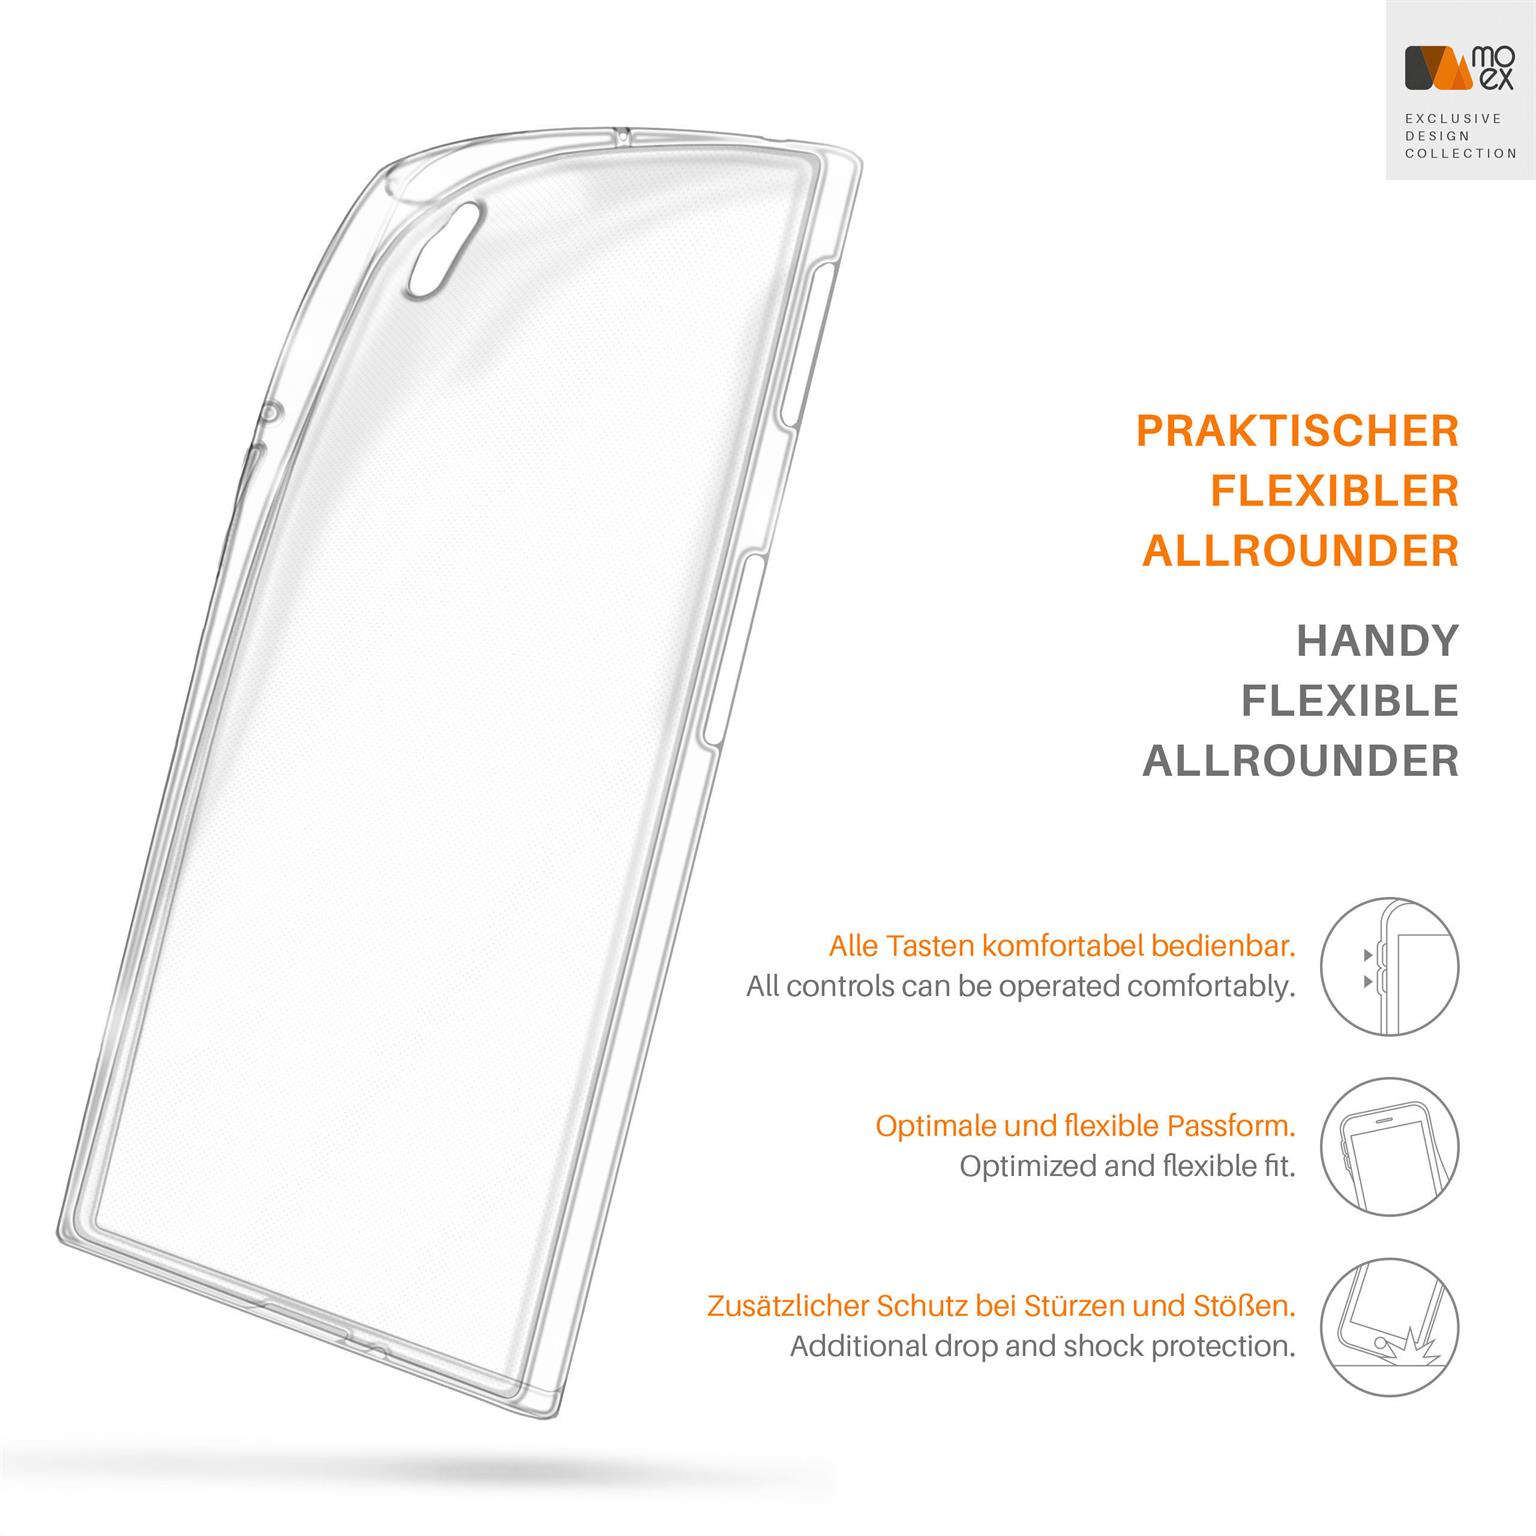 Backcover, Z1, Xperia Sony, MOEX Case, Crystal-Clear Aero